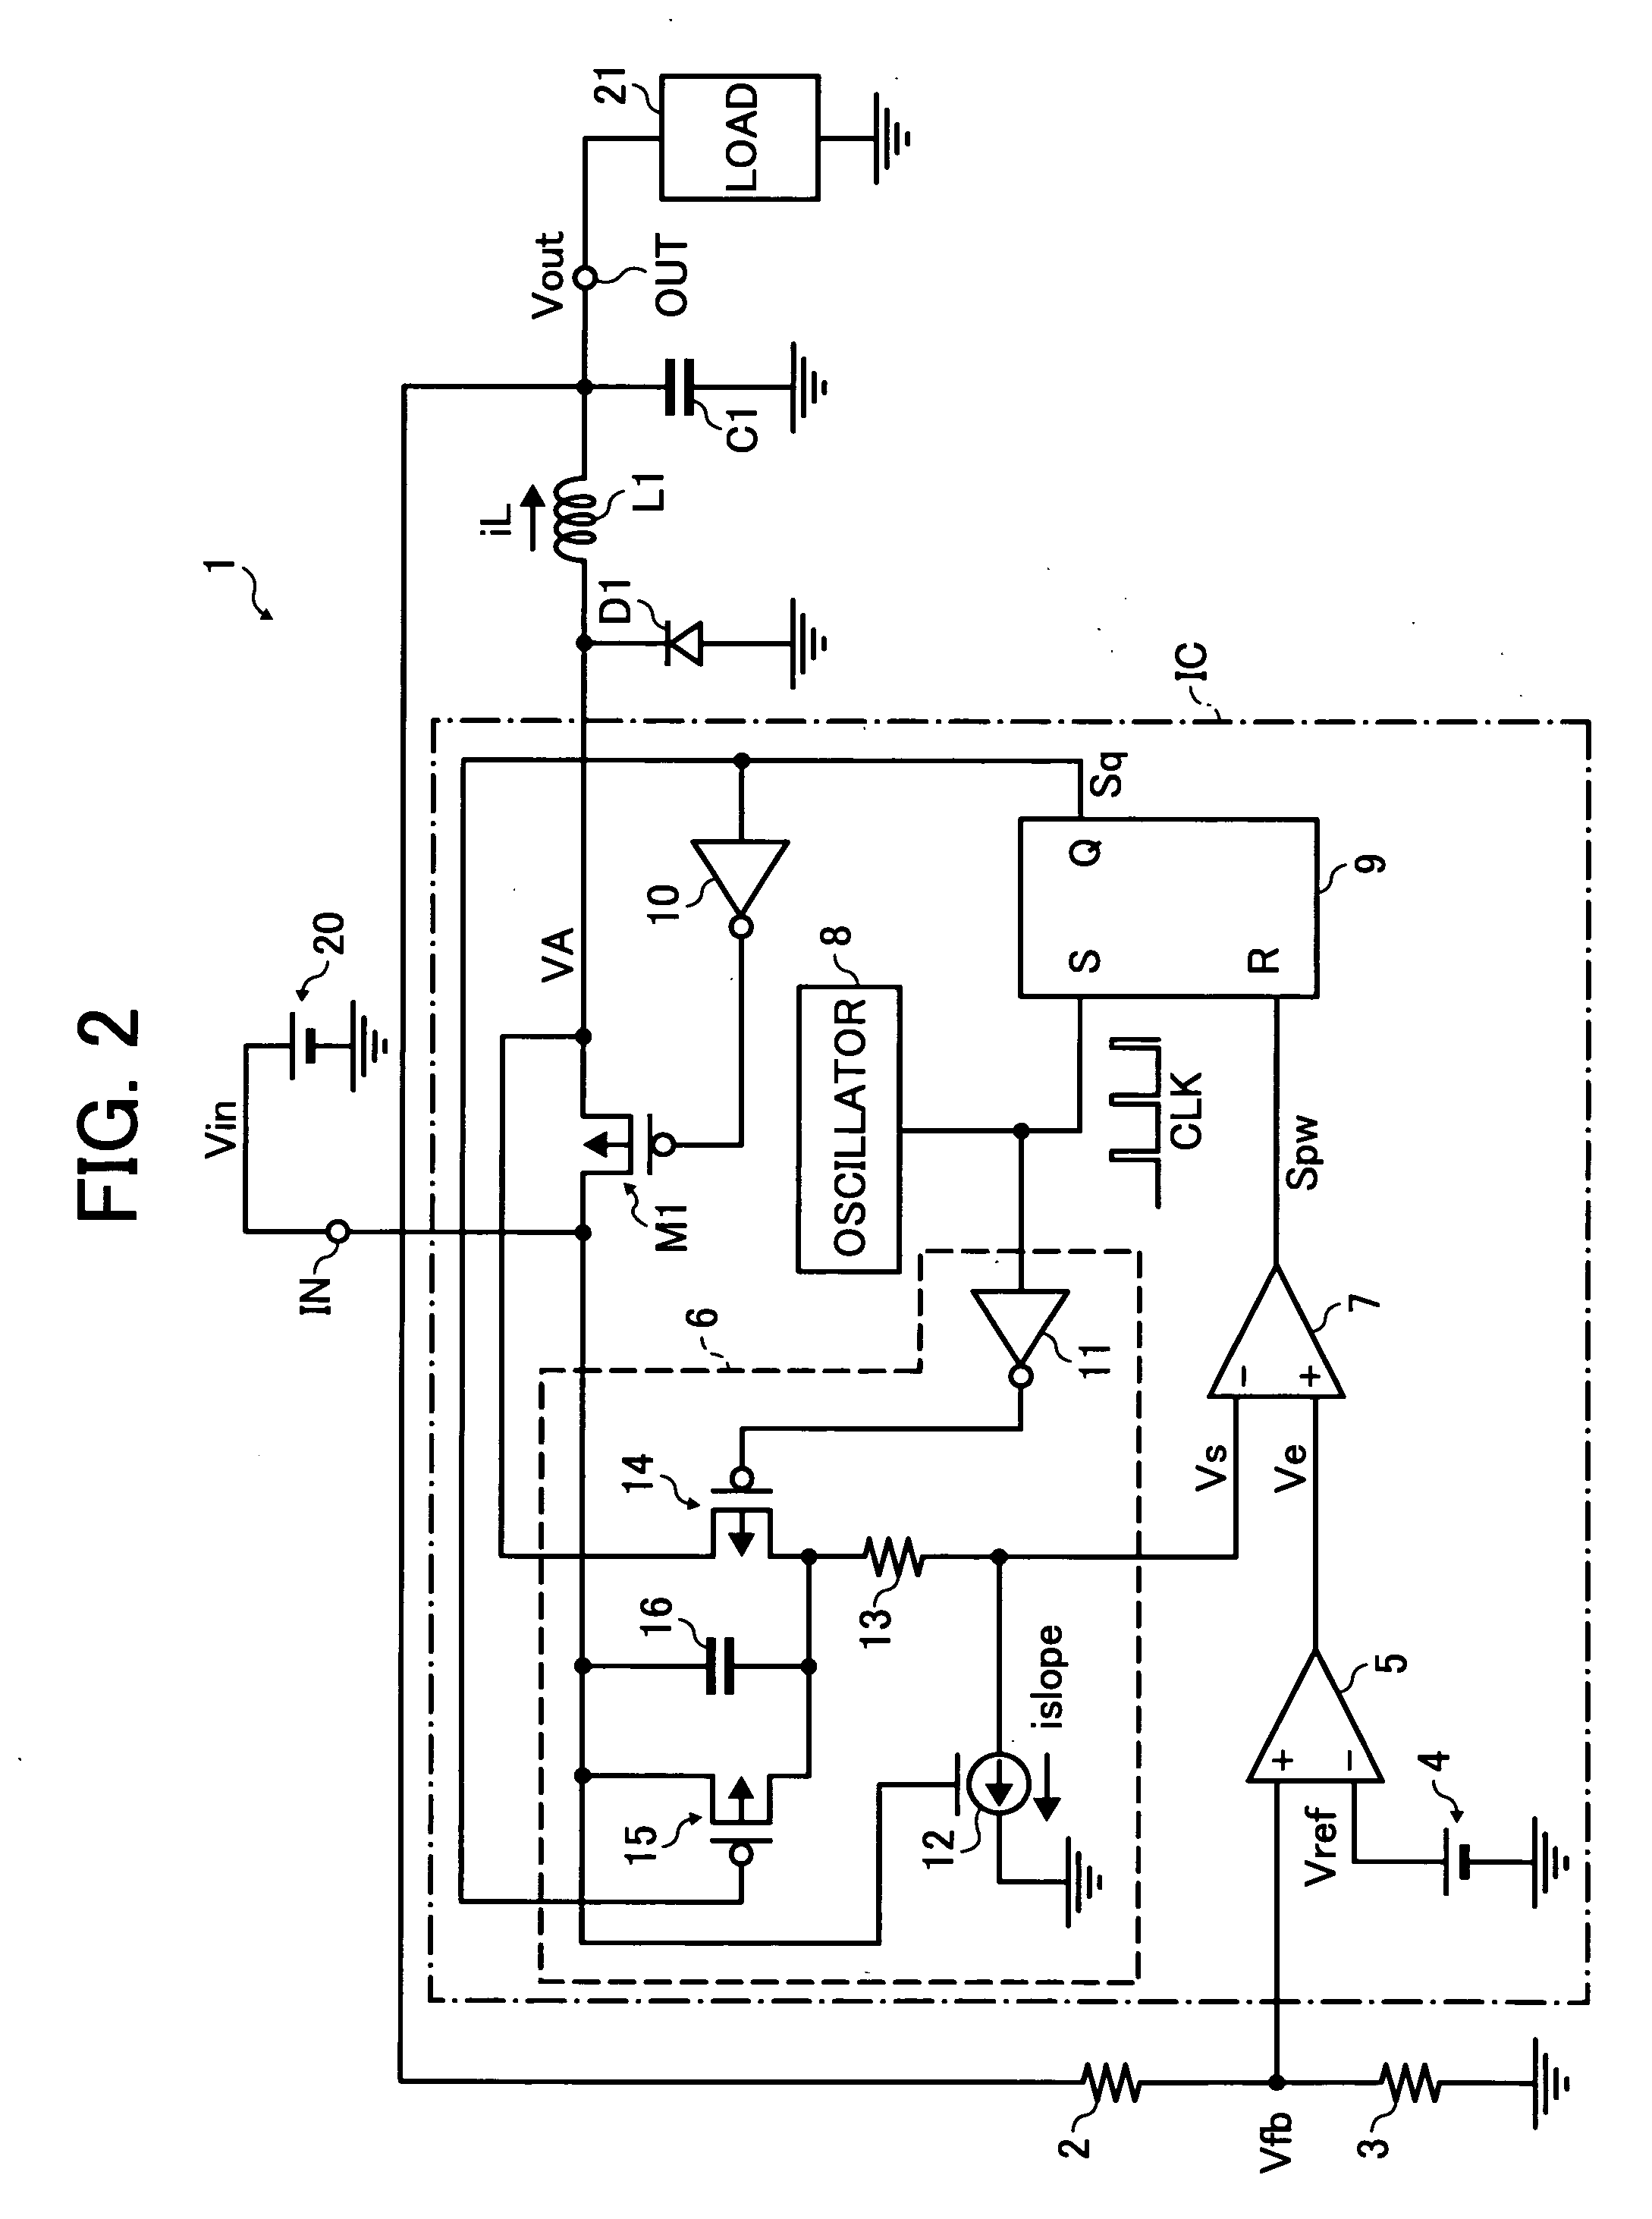 Current-mode controlled switching regulator and control method therefor